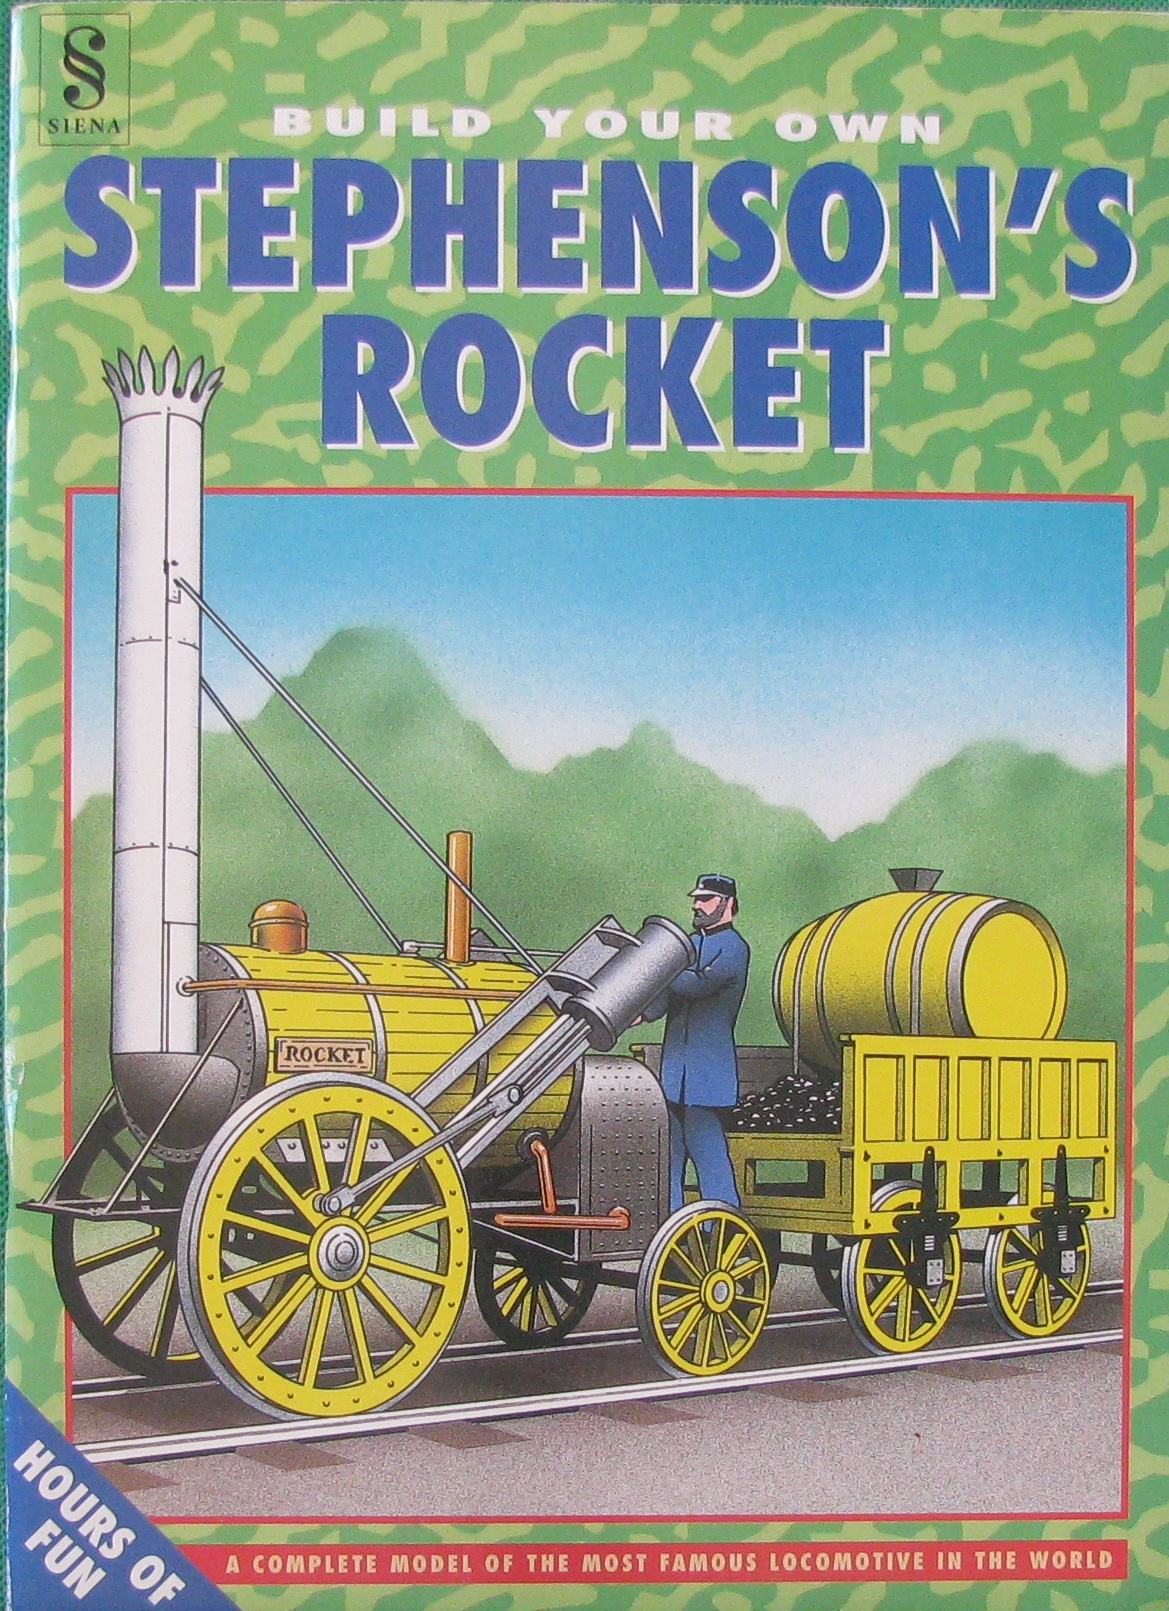 build your own stephenson"s rocket